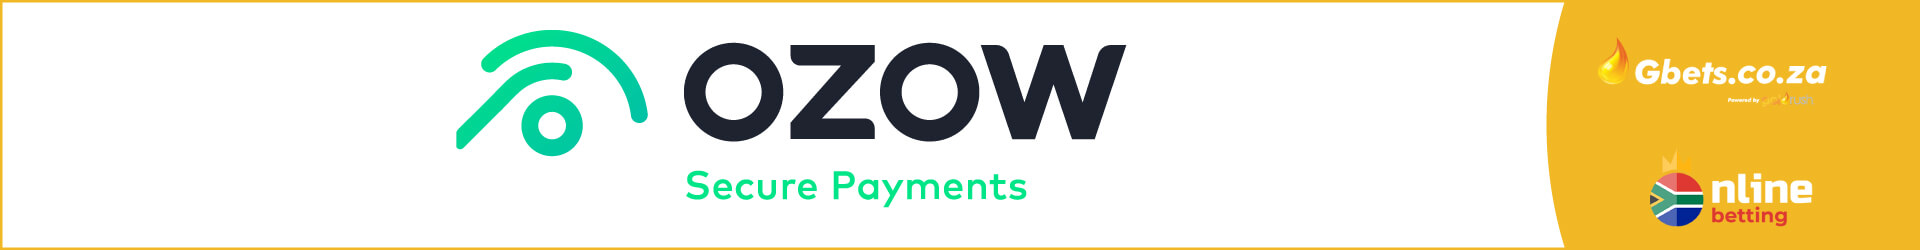 How to deposit money to Gbets using OZOW